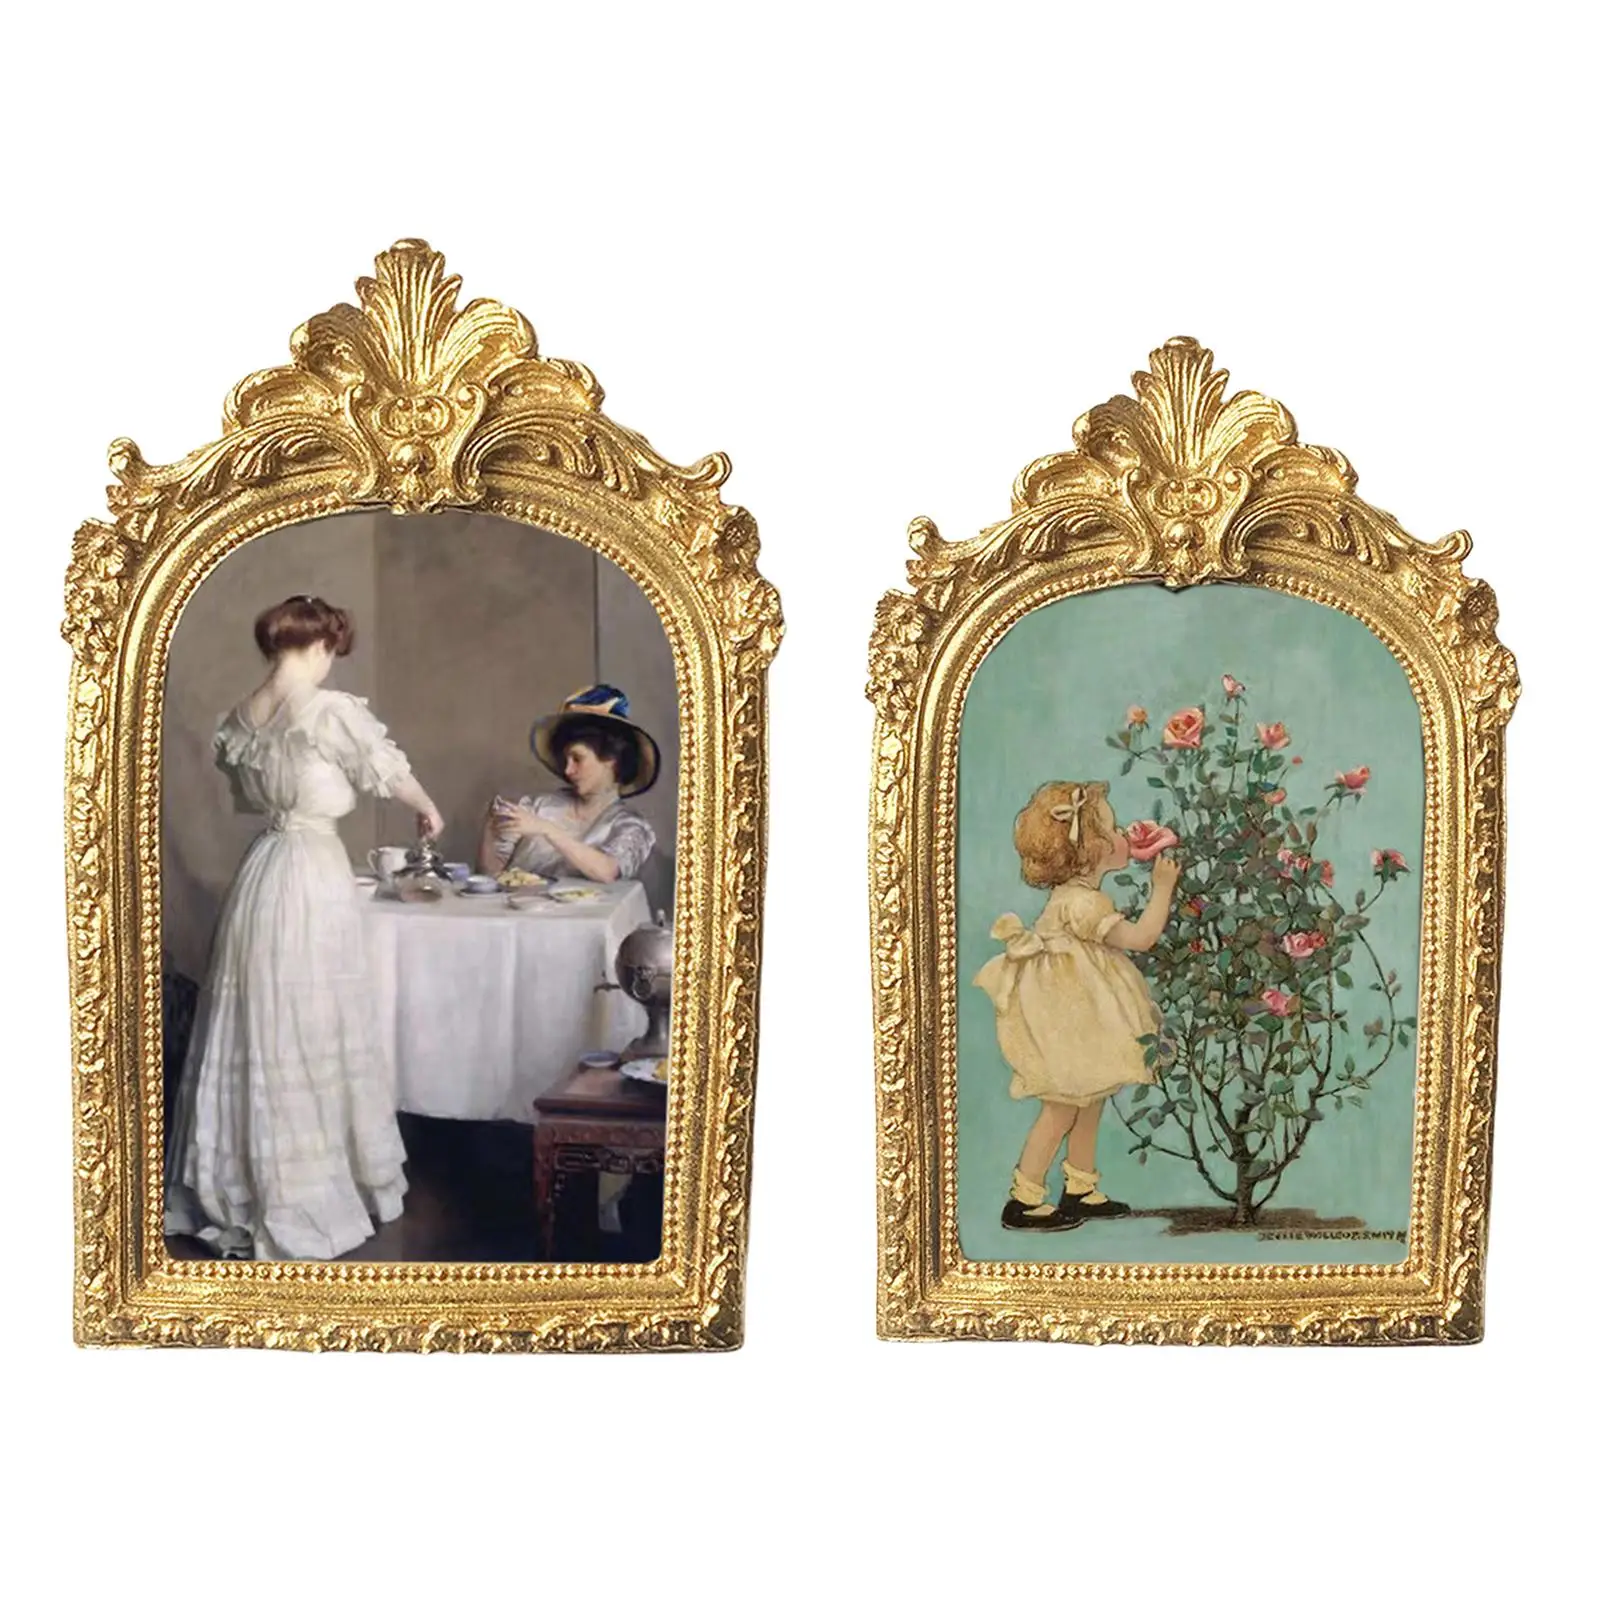 Antique Resin Photo Display Frame Old Fashioned Tabletop Wall Hanging Elegant Gift for Office